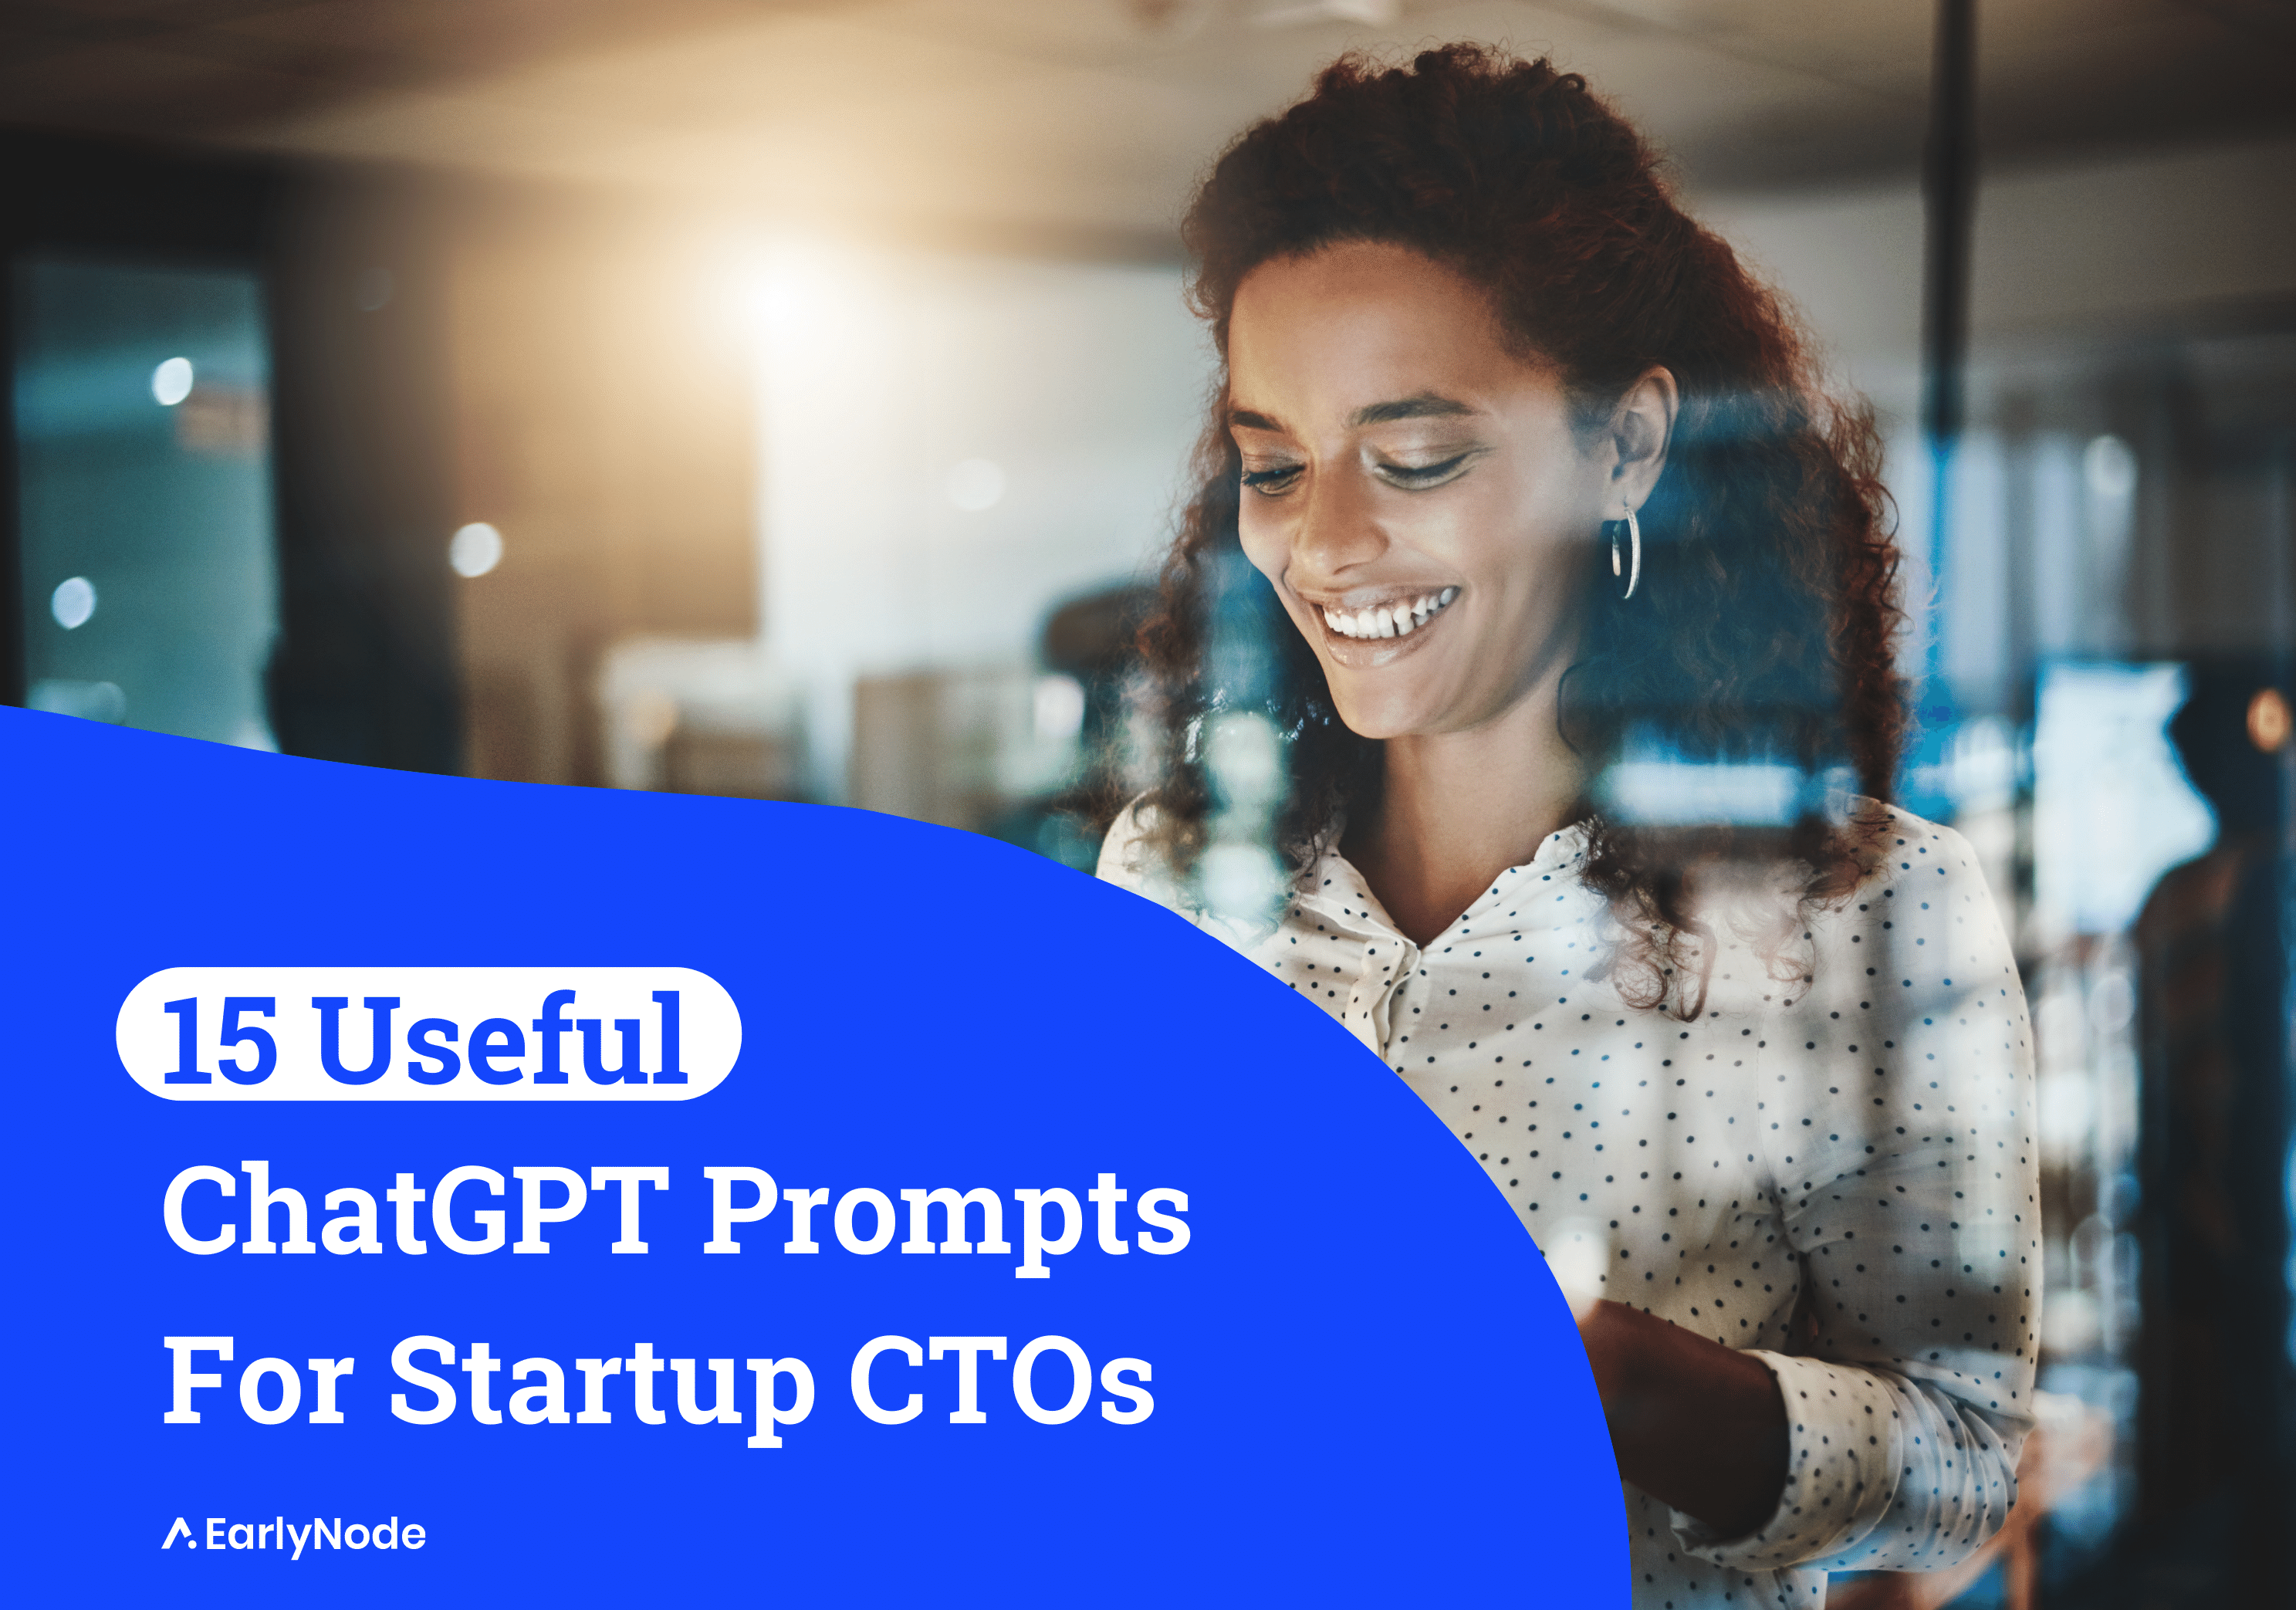 15 Technical ChatGPT Prompts For Startup CTOs